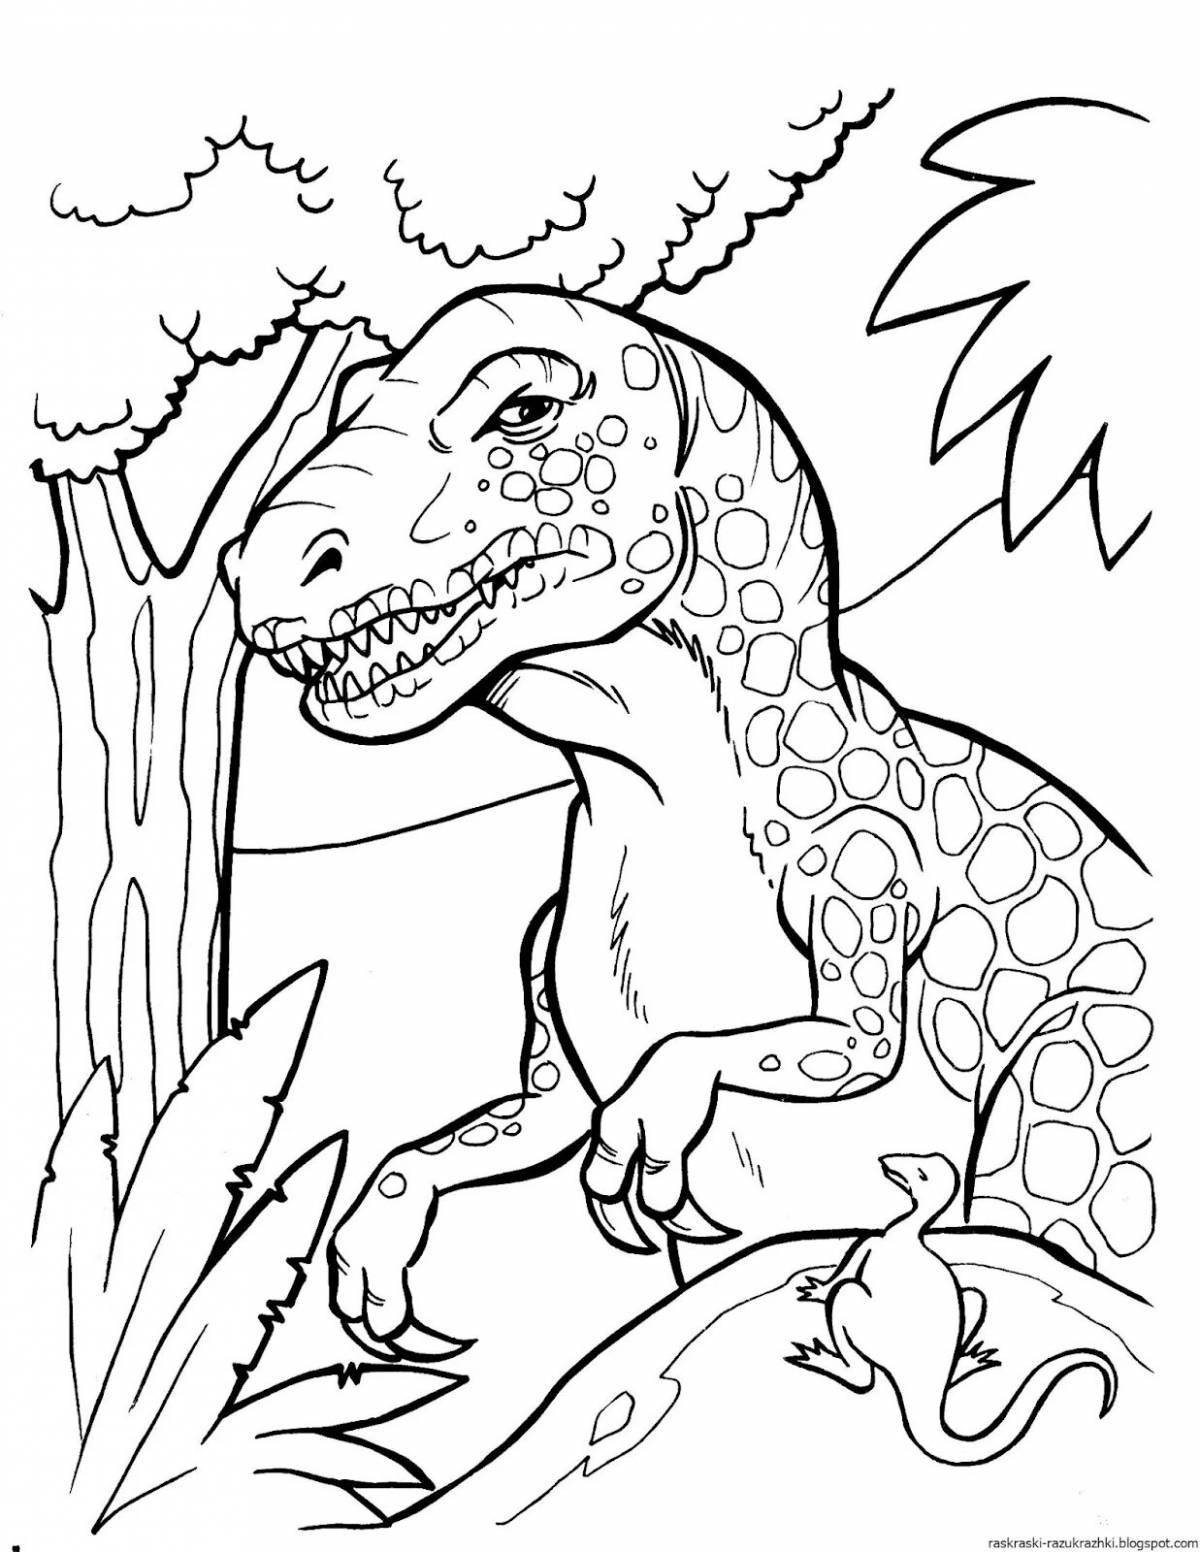 Creative dinosaurs coloring book for kids 5-8 years old